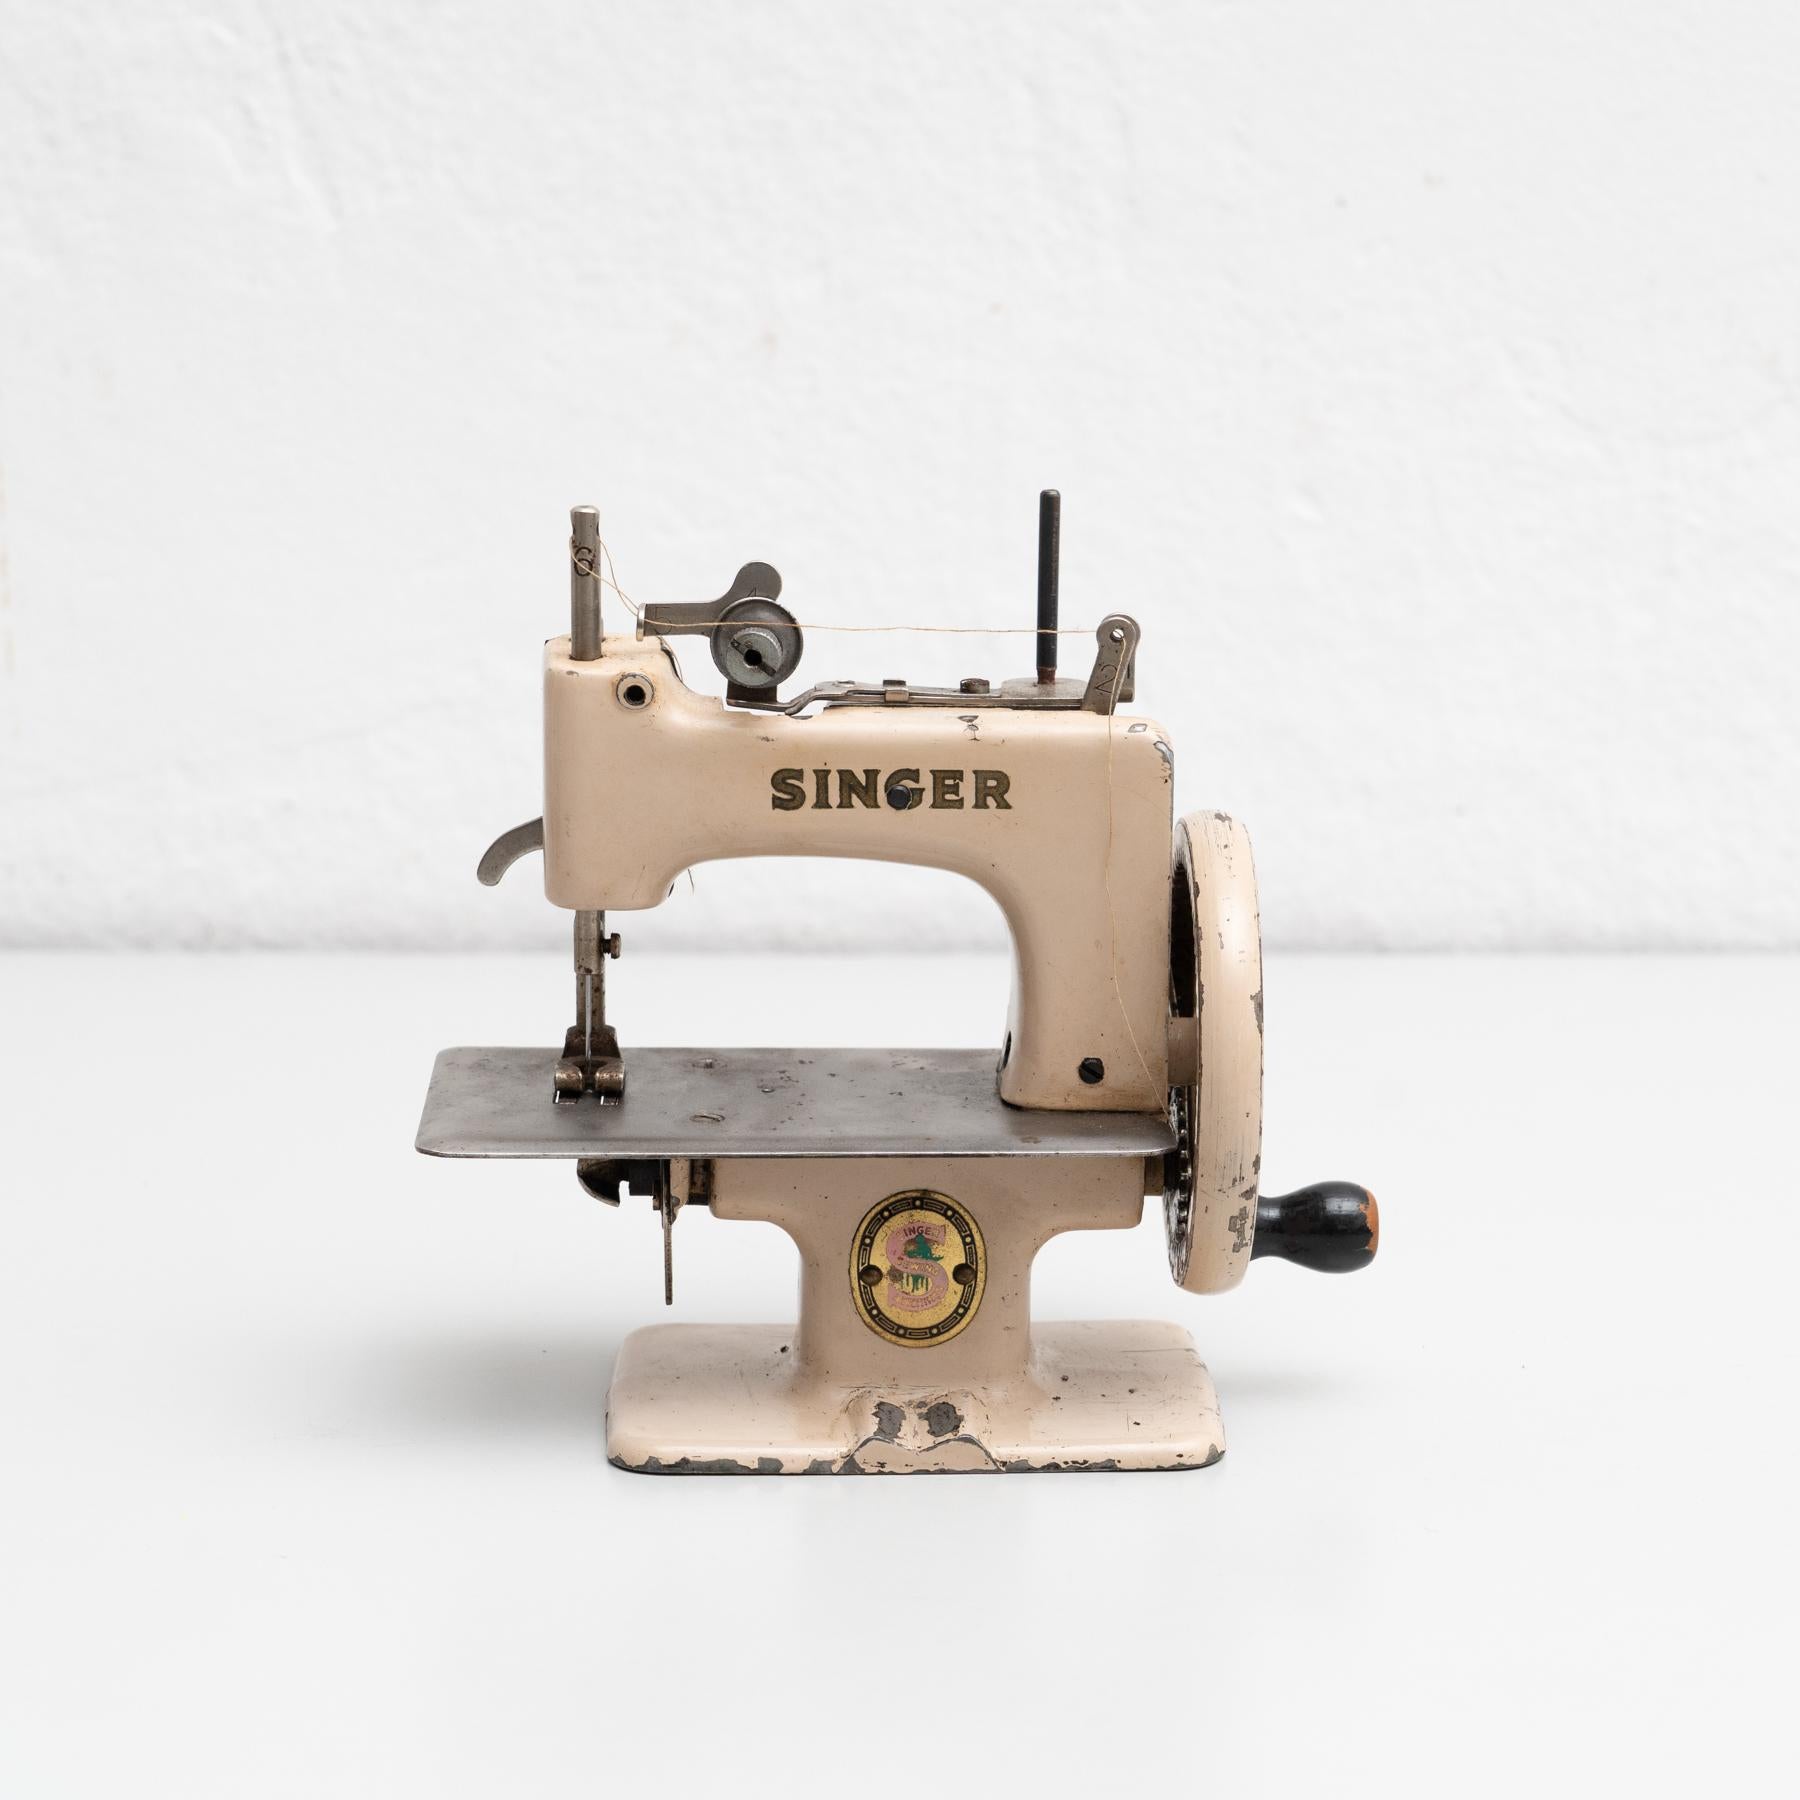 Vintage metal toy Singer sewing machine reproduction.

In original condition, wear consistent with age and use, preserving a beautiful patina.

Materials:
Metal.
 